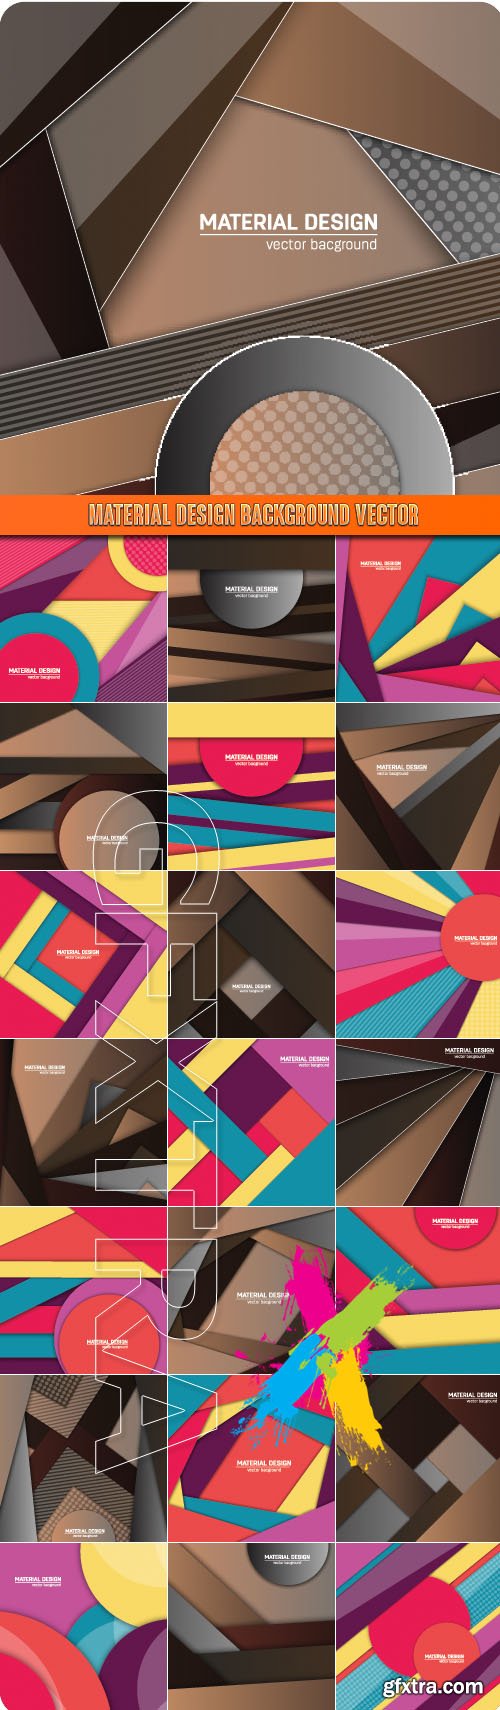 Material design background vector